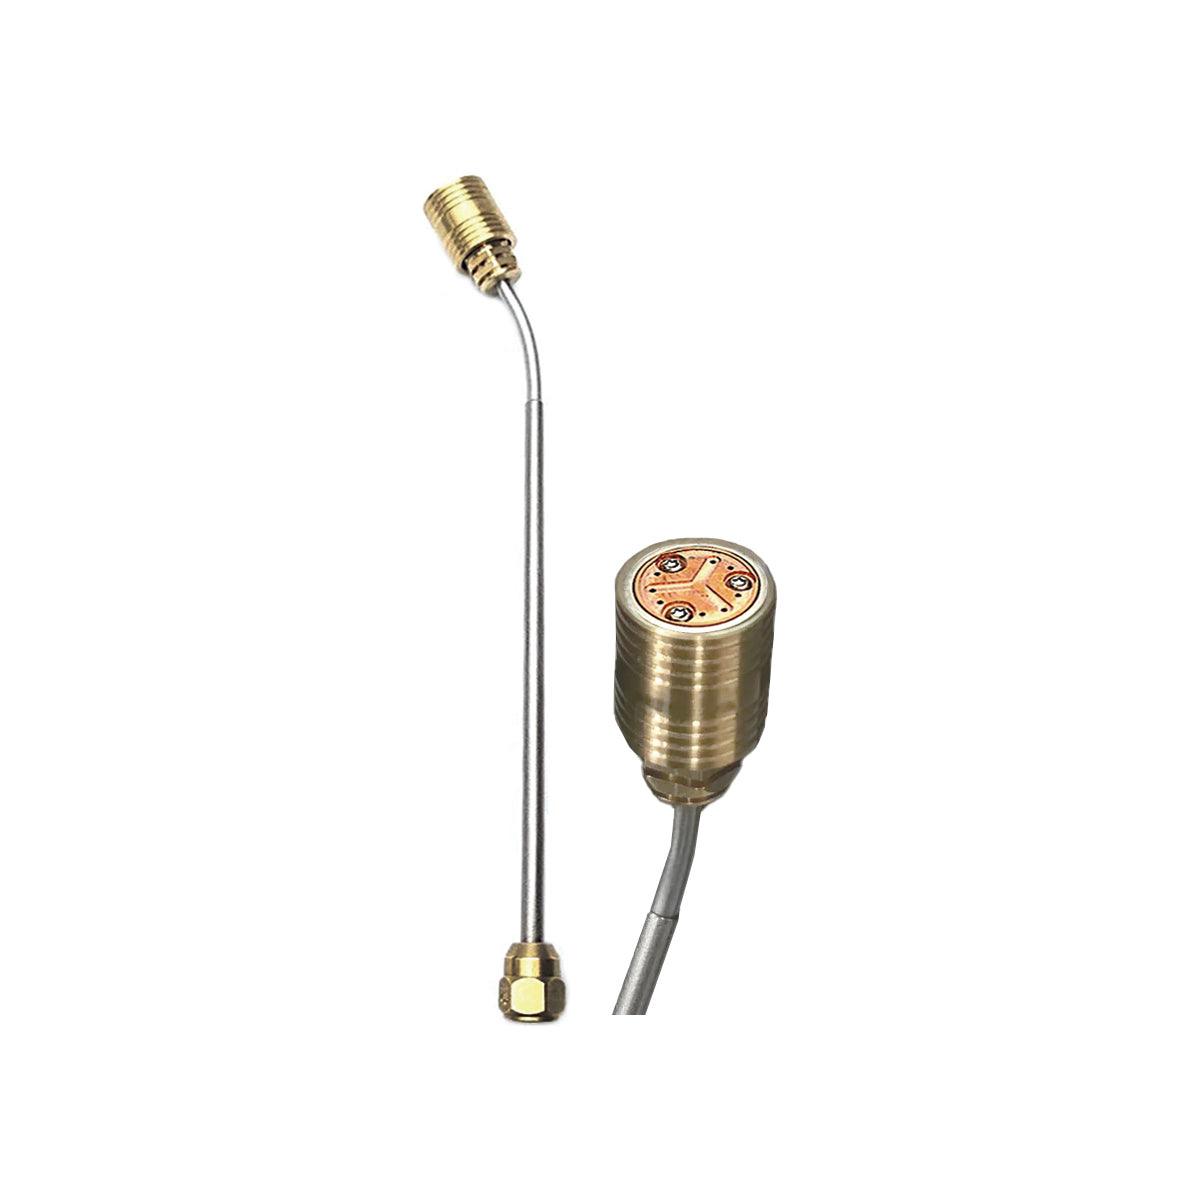 Hoke Jeweler's Torches - Natural Gas Torch, Jewelry Making